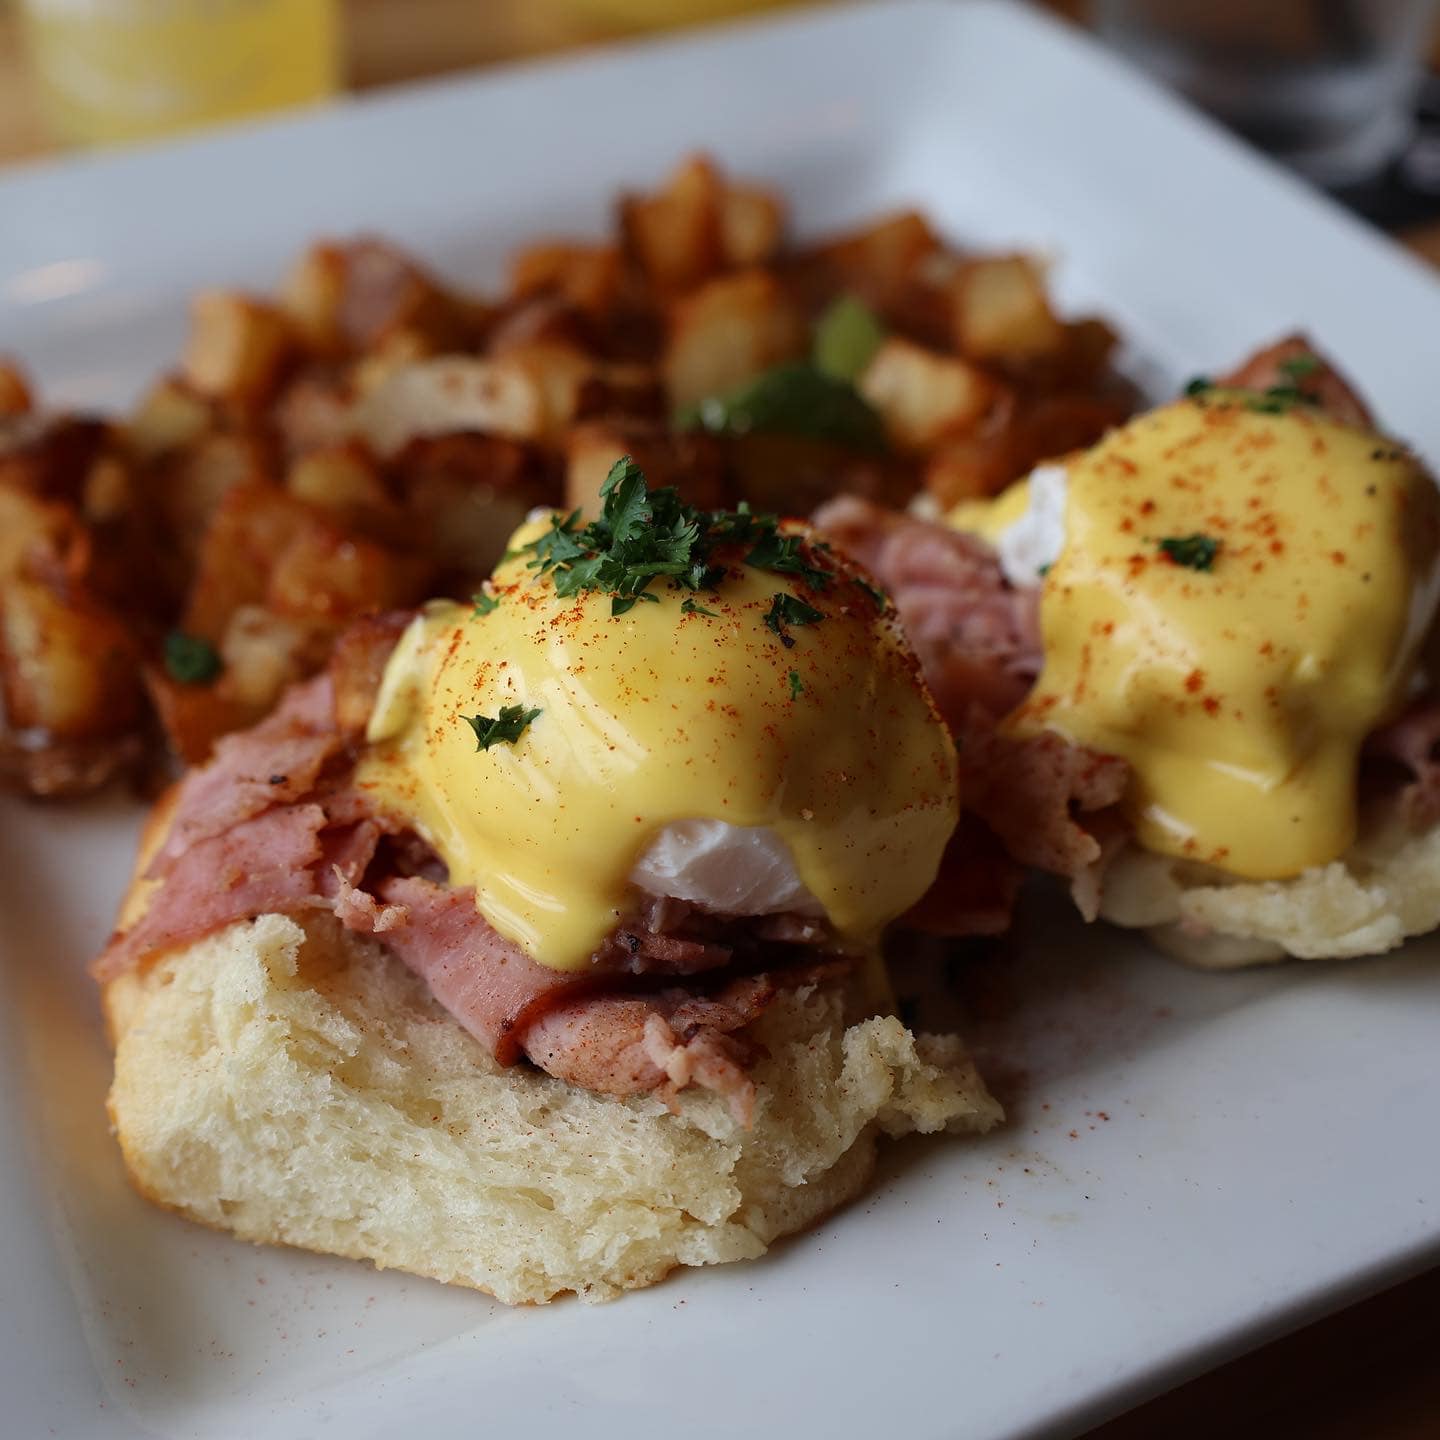 eggs benedict with biscuits, ham, and eggs, with hollandaise sauce at balter beerworks for brunch on new years in knoxville 